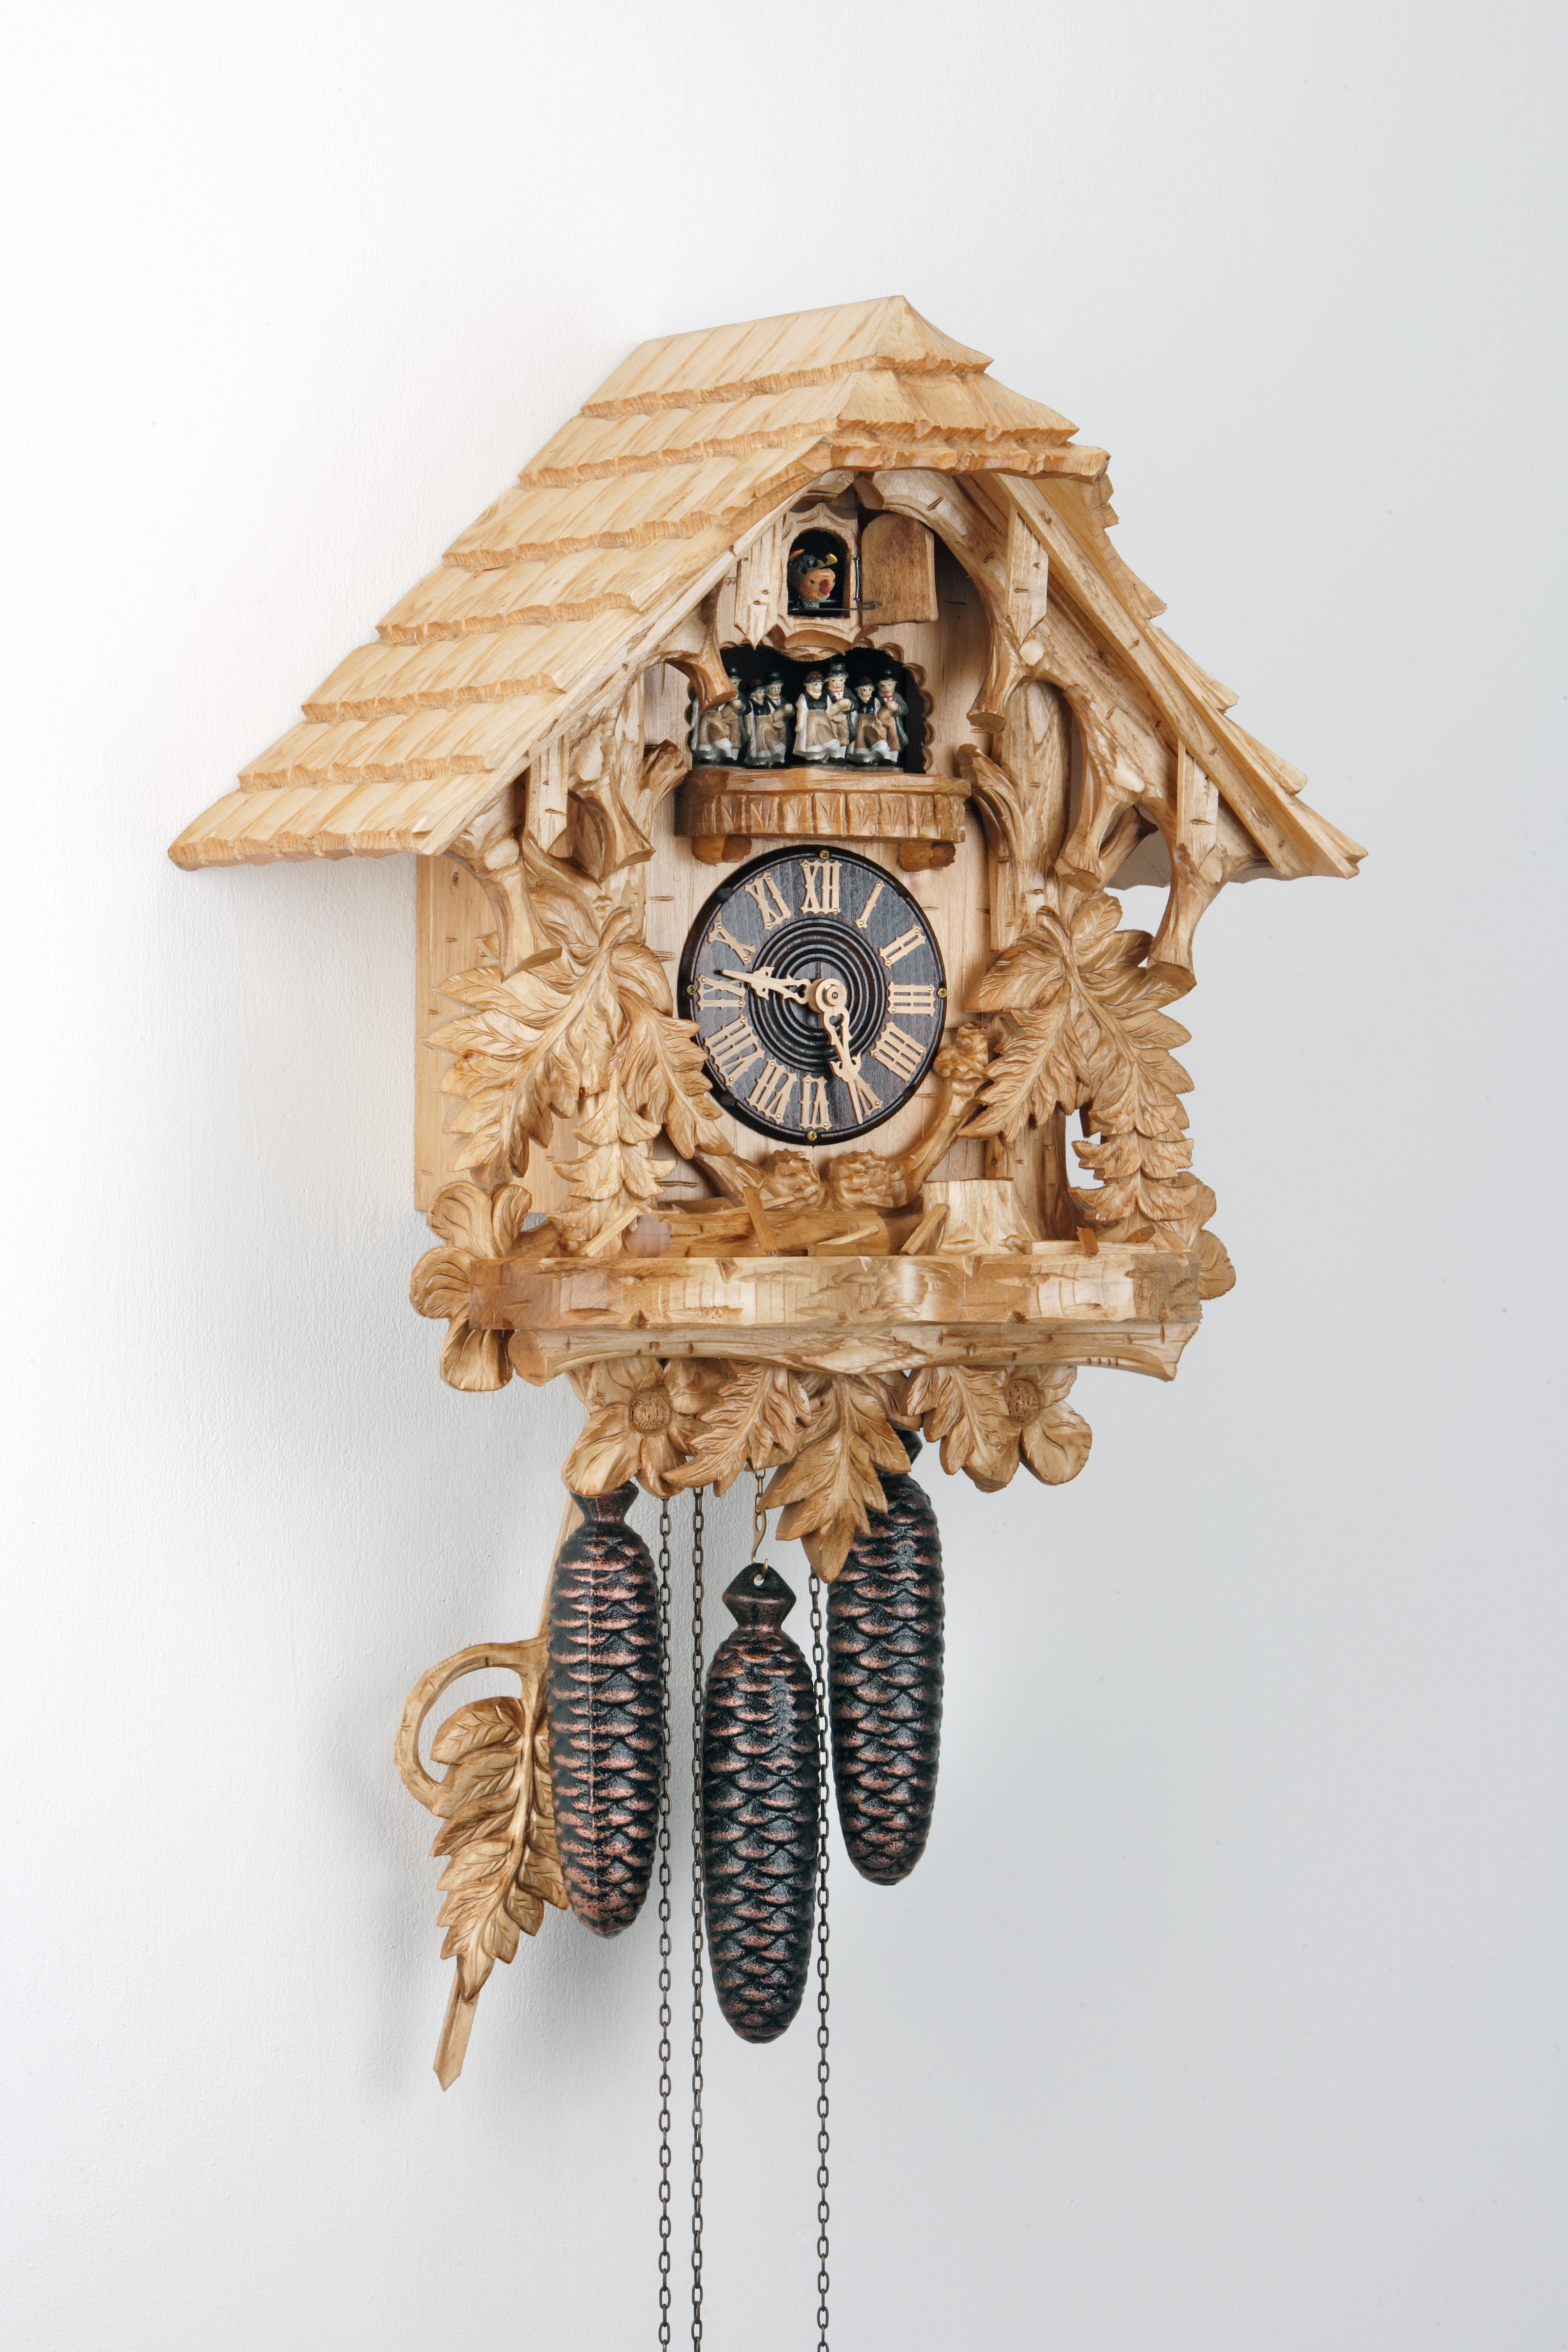 8 Days Music Dancer  Cuckoo Clock Black Forest House with fern leaves